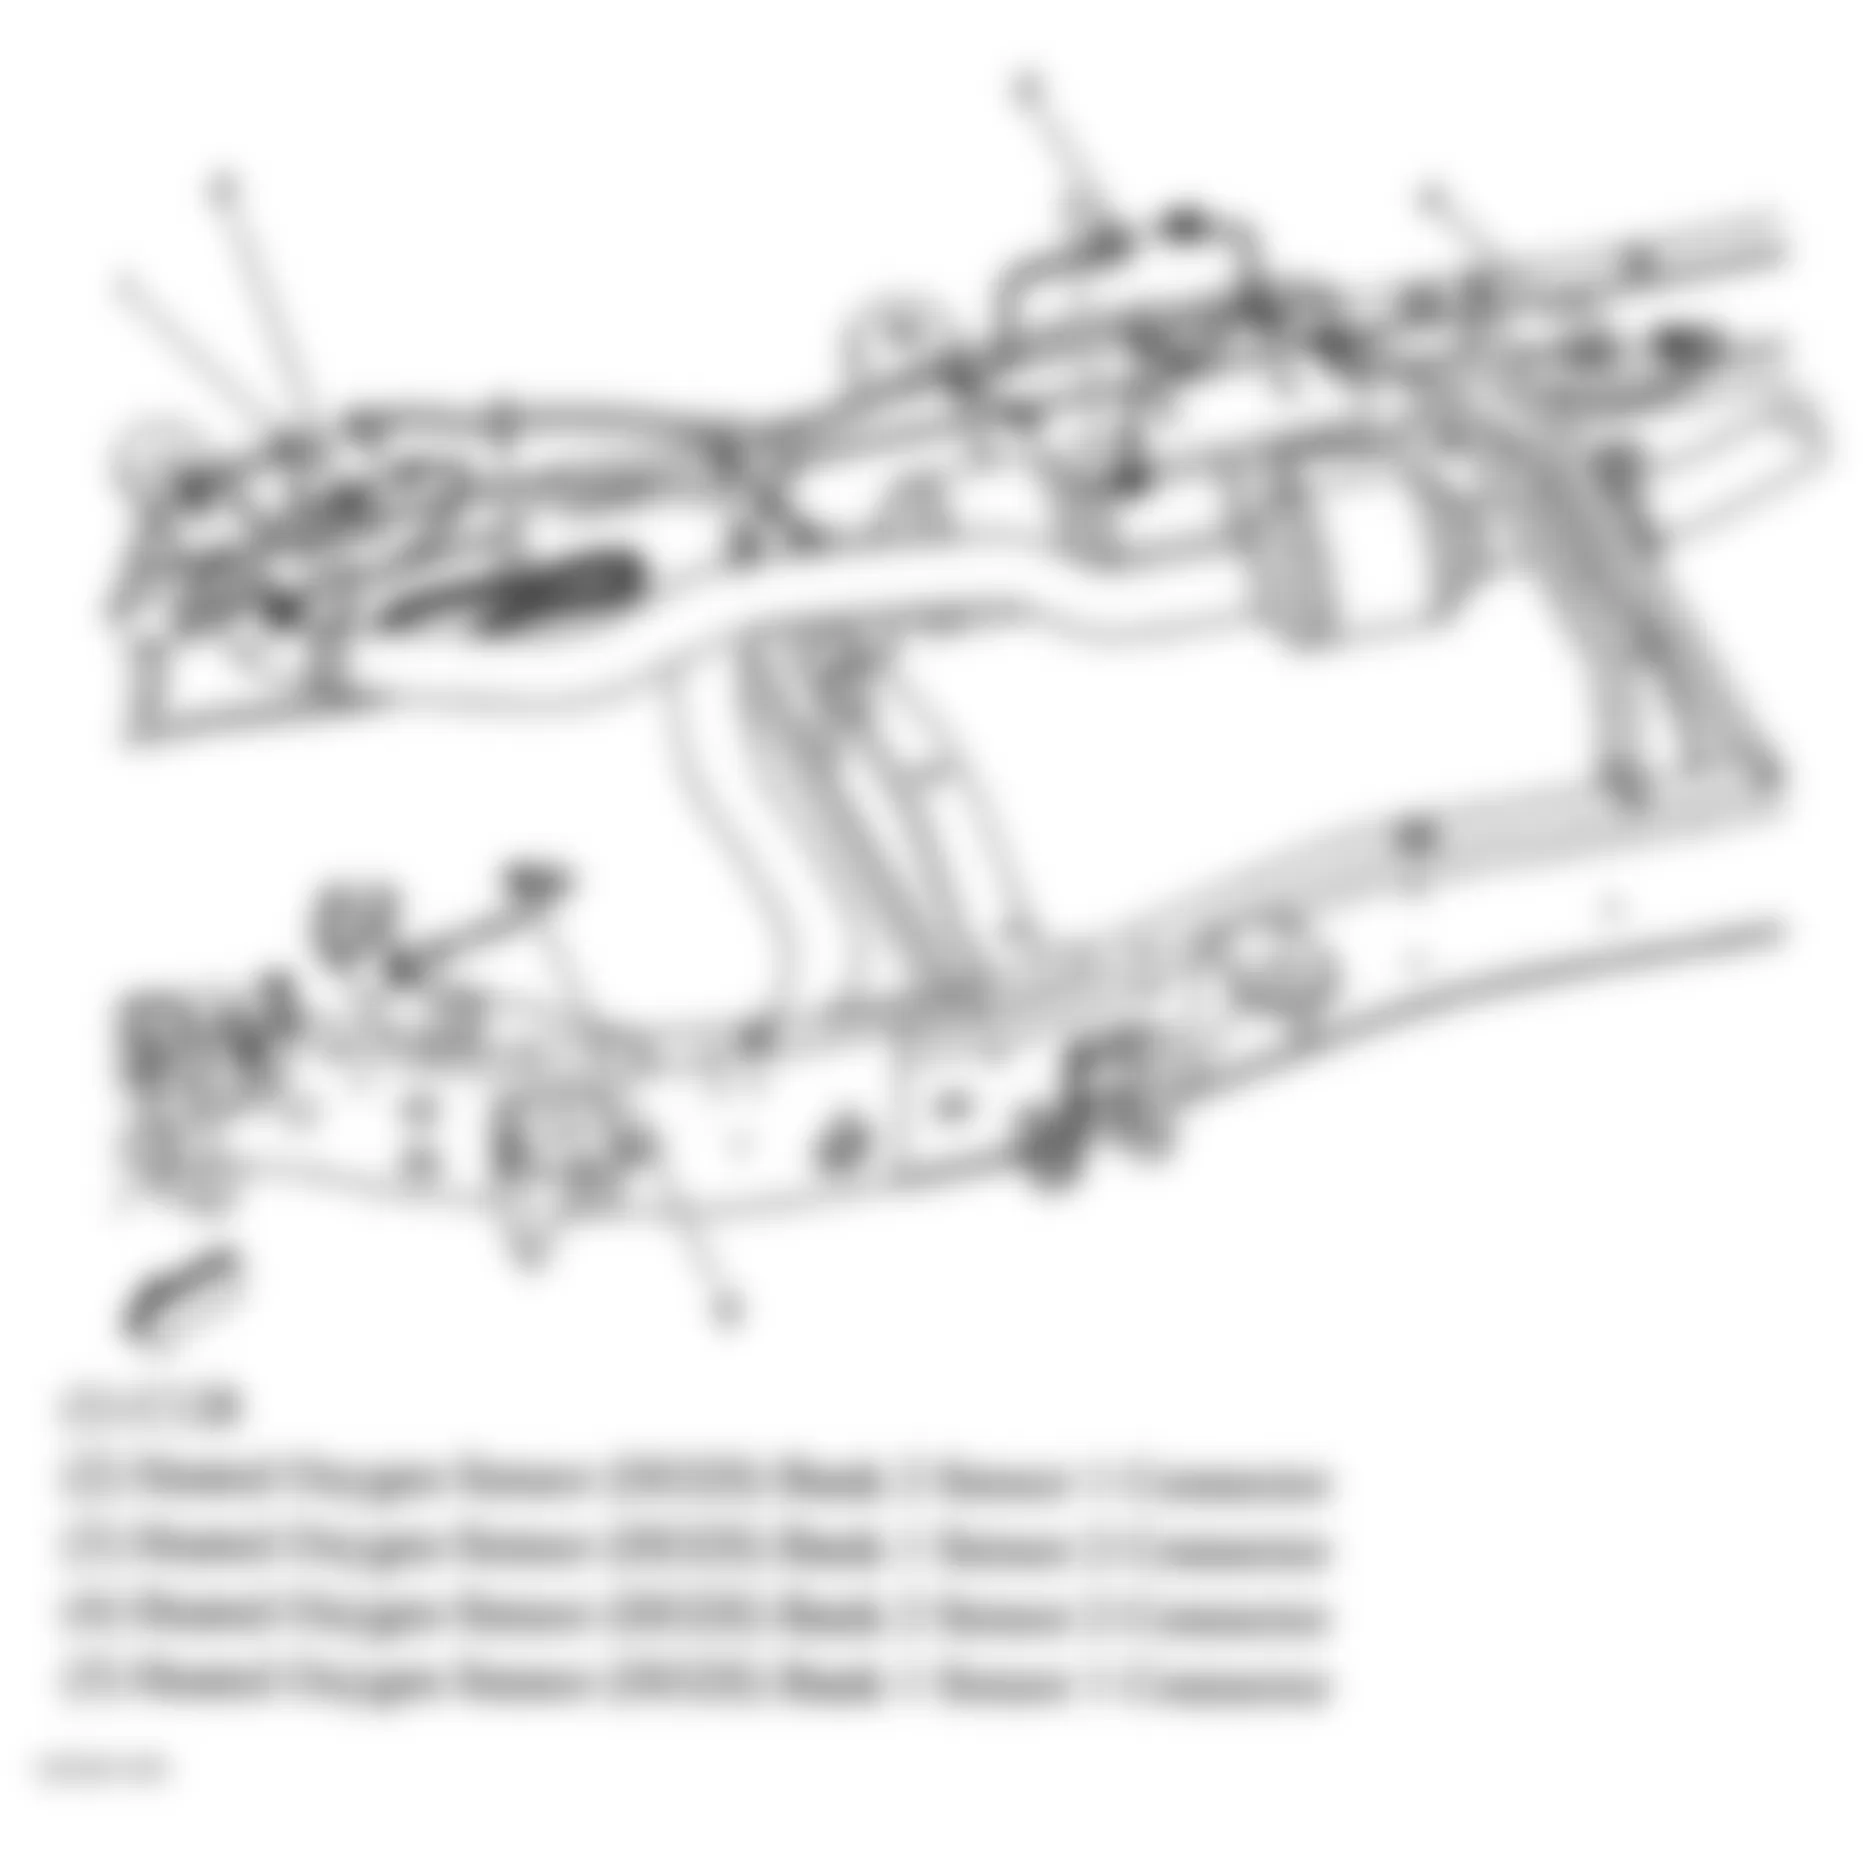 GMC Savana G2500 2004 - Component Locations -  Center Of Chassis